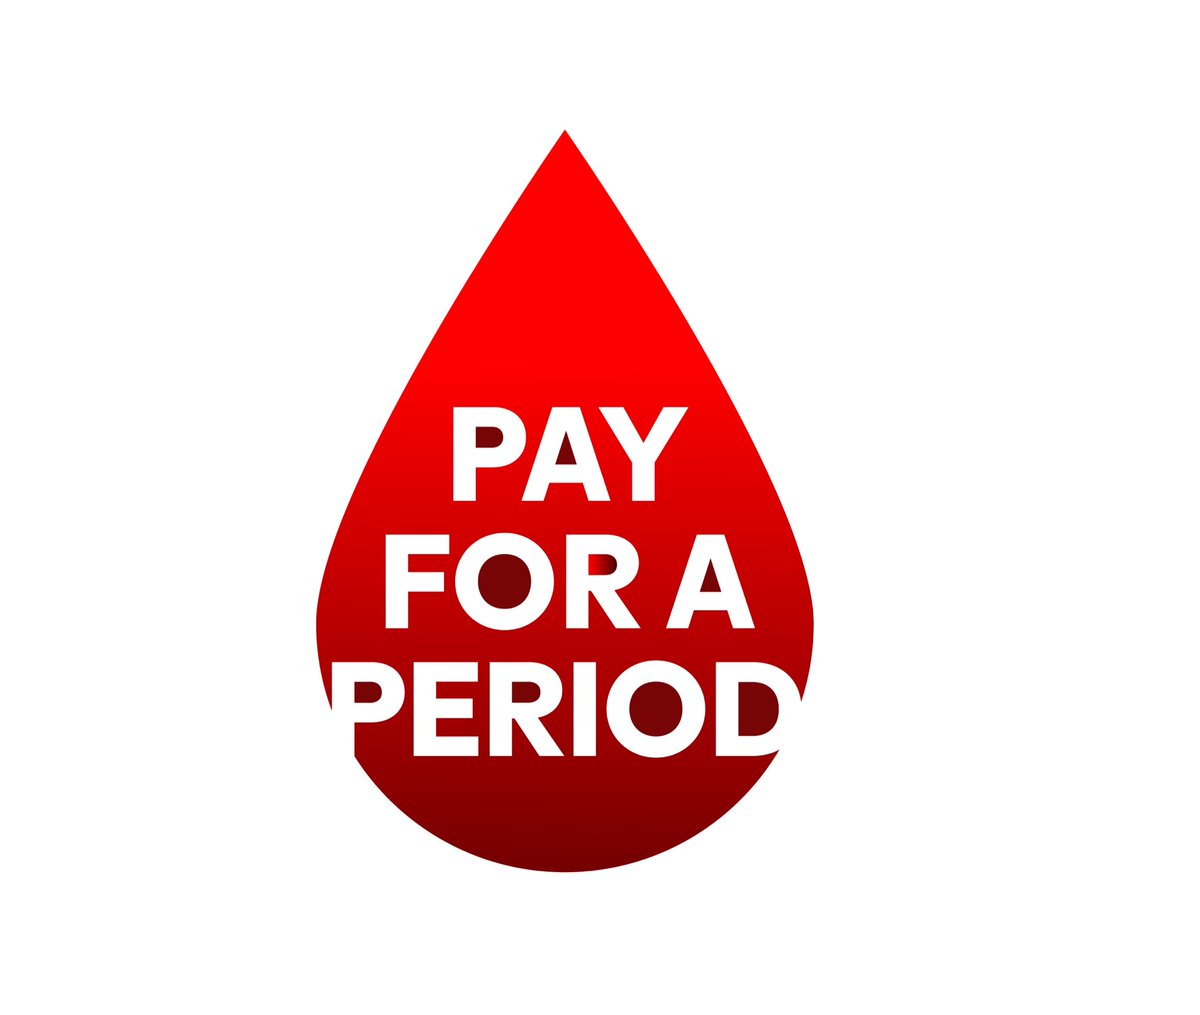 The Pay for a Period project is an initiative of @ThrivingWomen_F 

Women and girls deserve to have their periods without worrying about access to basic sanitary materials. Help us #pay4aperiod

#womensupportingwomen #sdg1 #sdg5 #periodpovertyawareness #womenempowerment